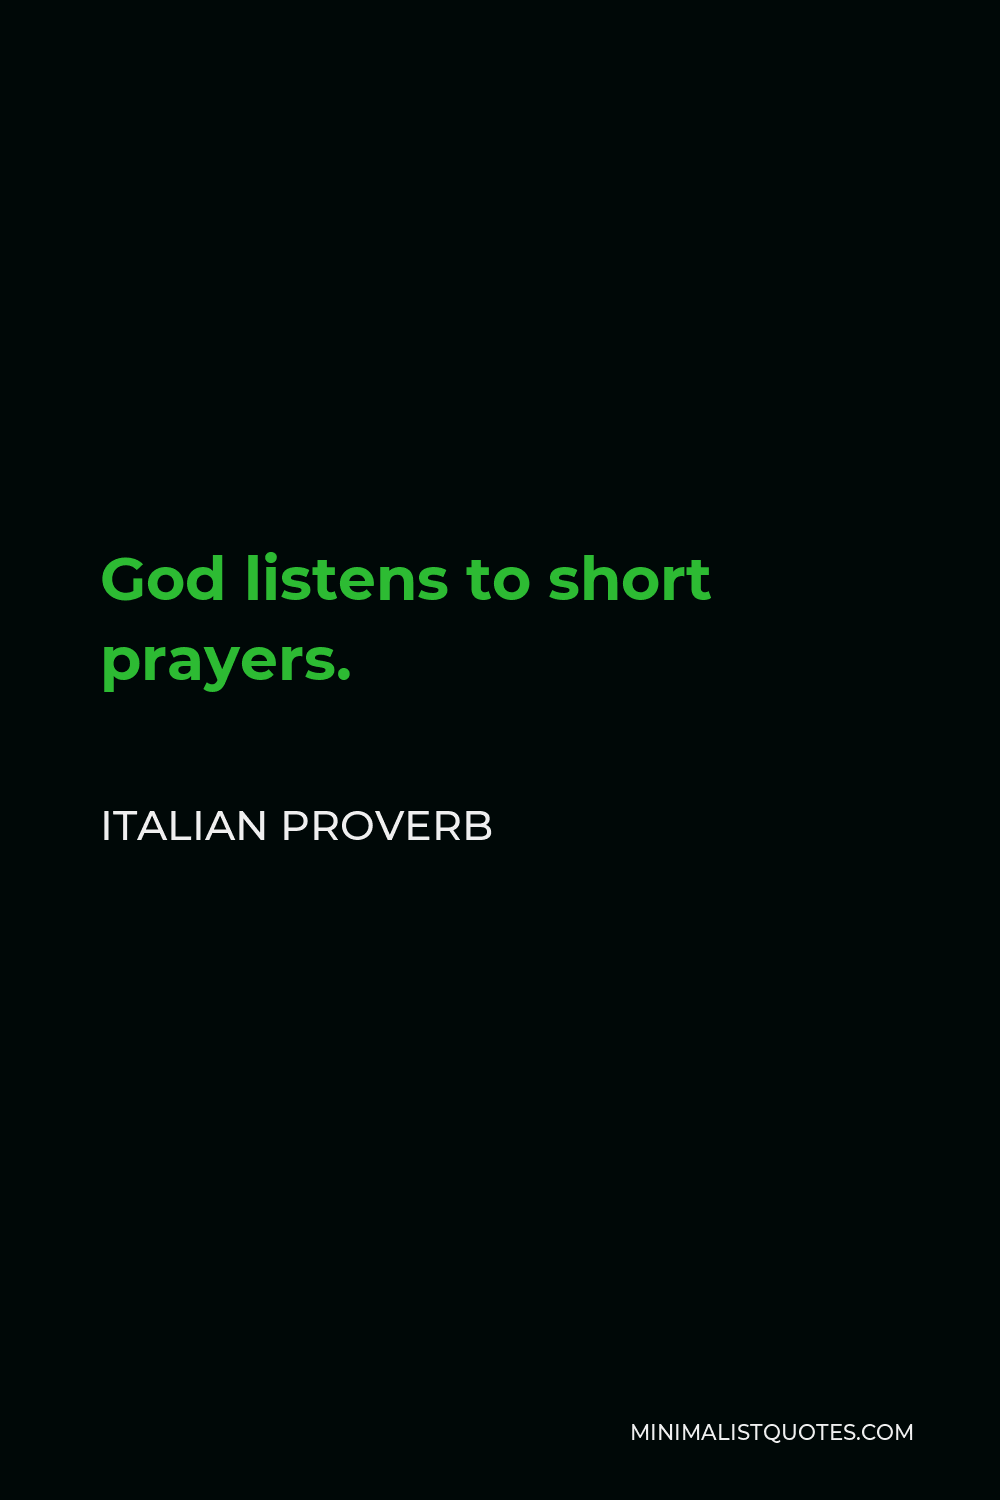 Italian Proverb Quote - God listens to short prayers.